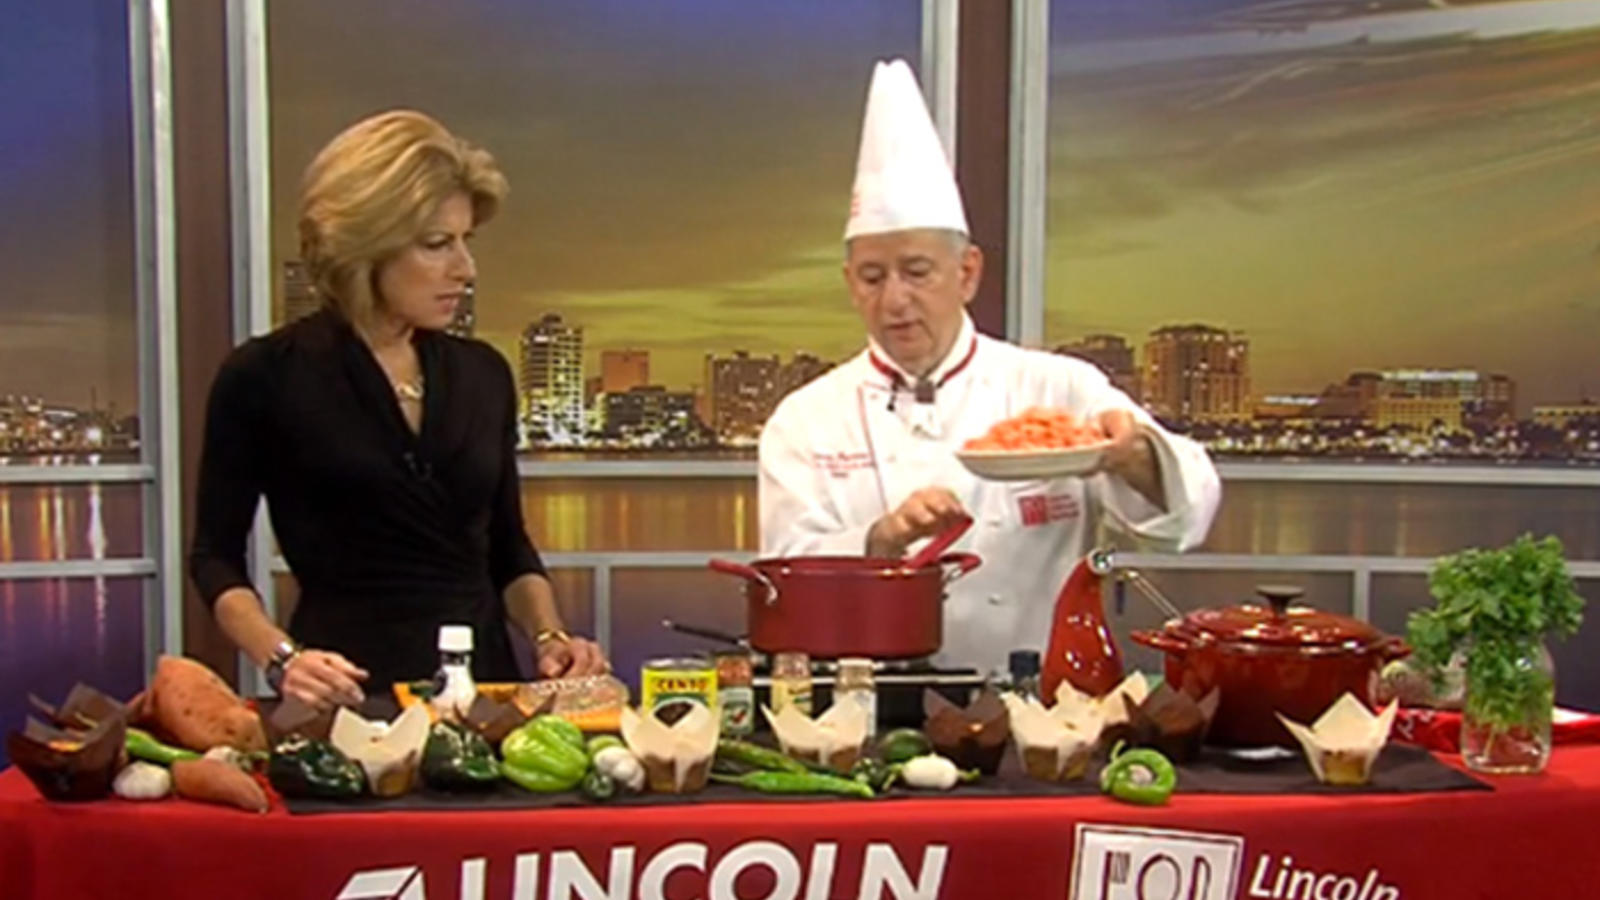 NBC Cooking Segment Featuring Lincoln Instructor, Chef Pantone